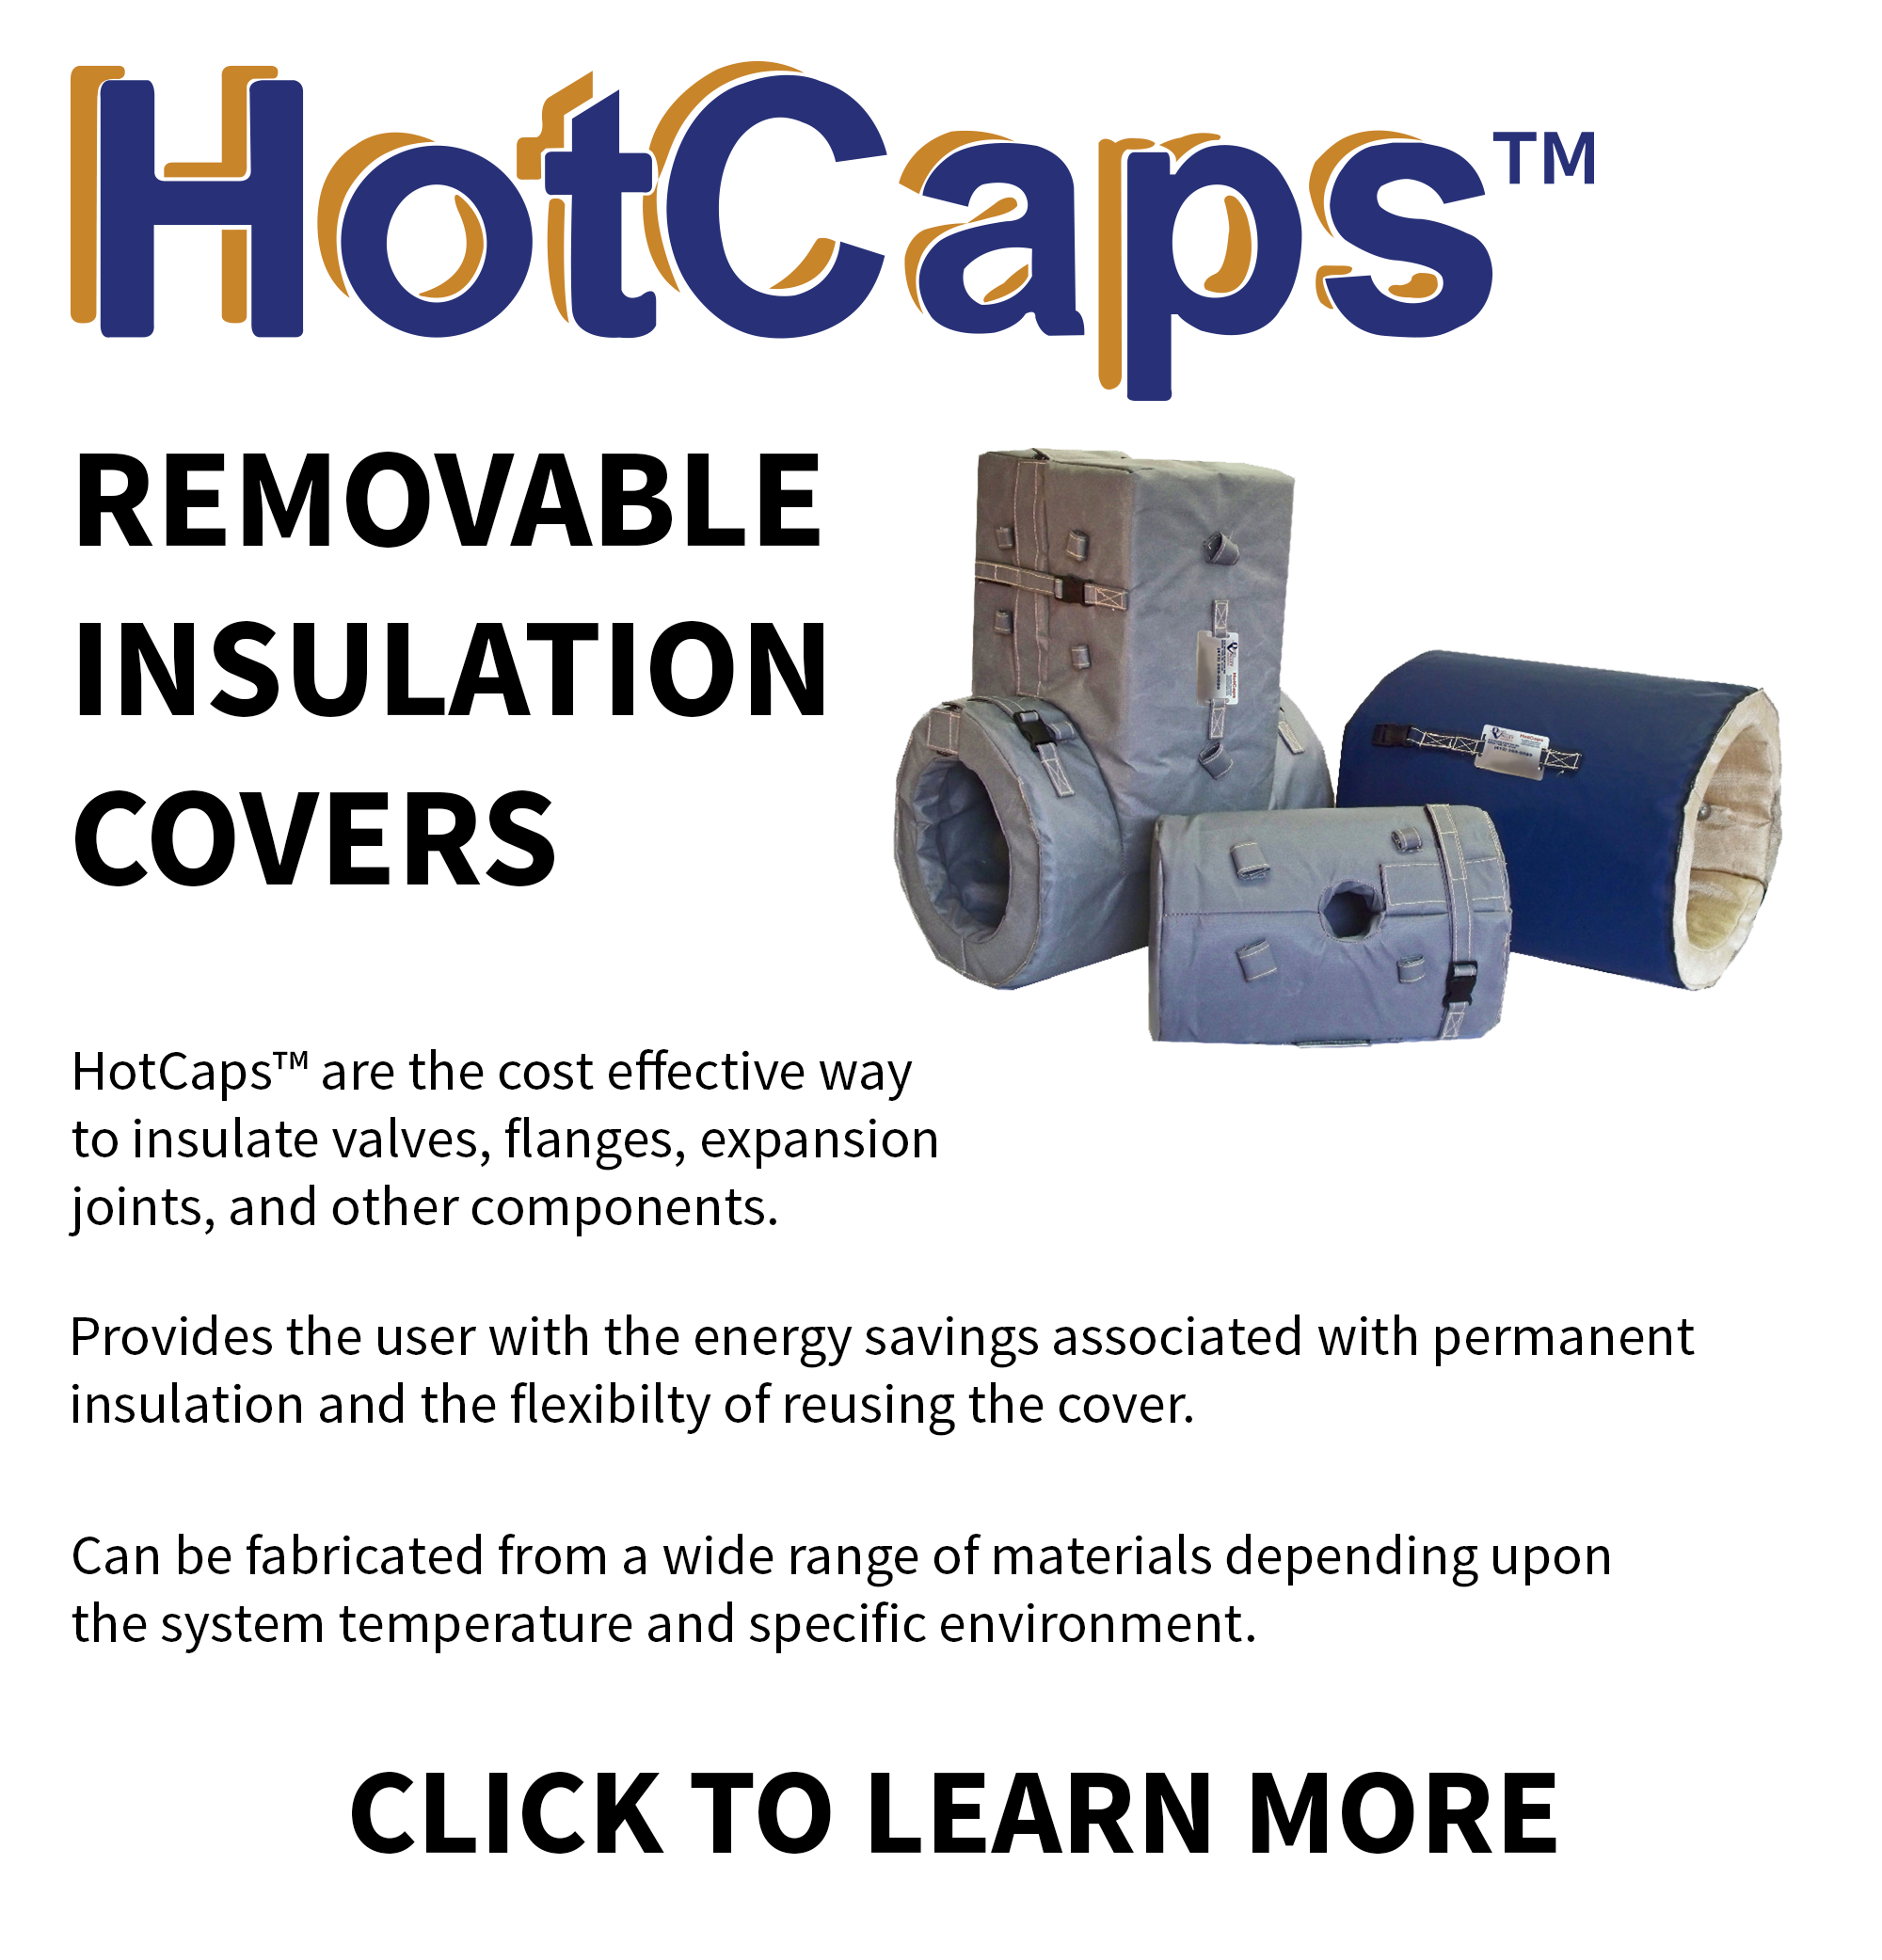 Ohio Valley Industrial Services- HotCaps™ Removable Insulation Covers